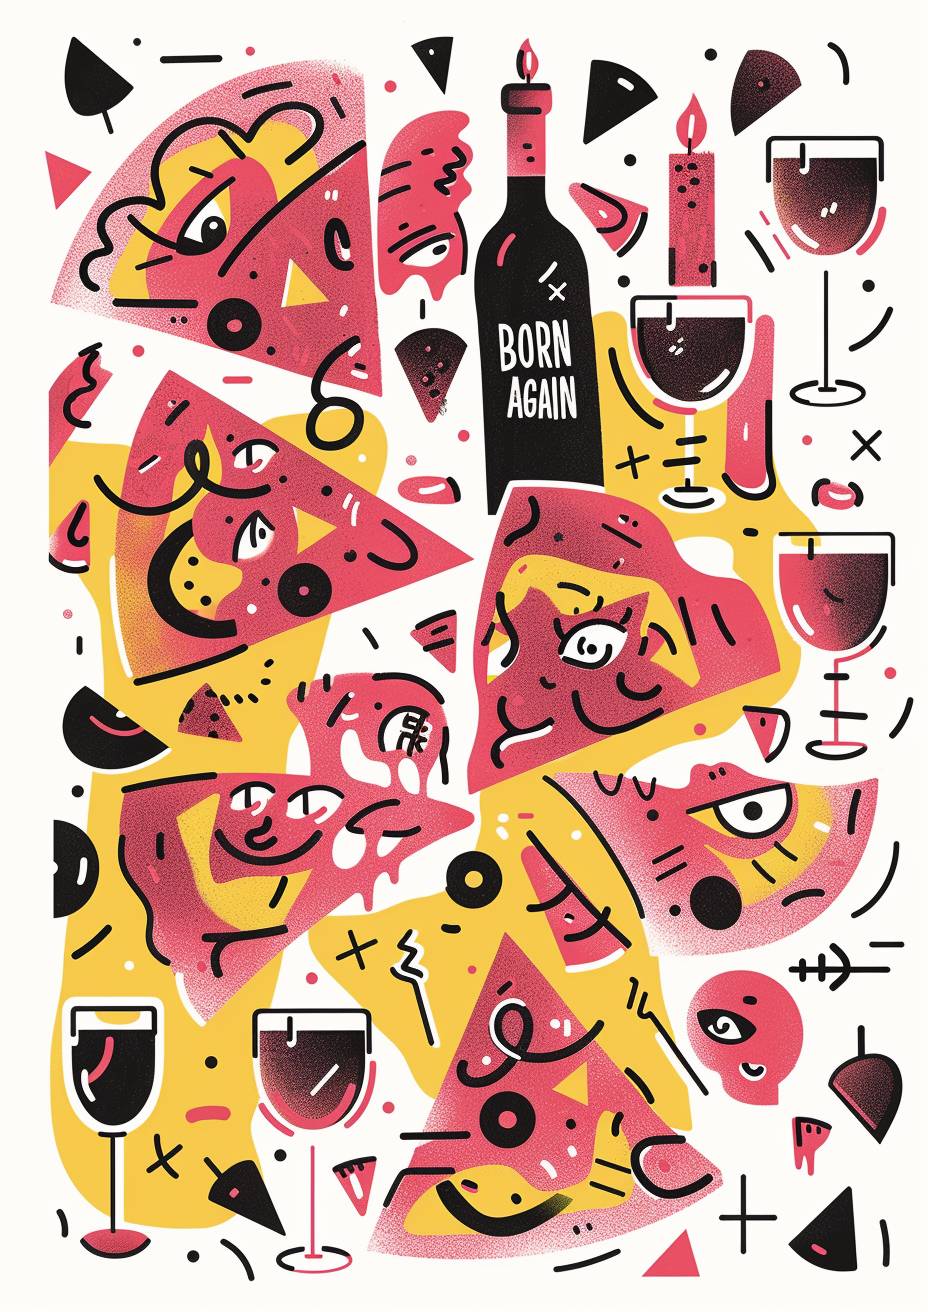 Pizza bar, small business poster design in the style of Keith Haring, with the text 'BORN AGAIN', bold lines and bright colors, cartoonish character designs of pizza slices and wine glasses, colorful woodblock prints in the style of Pop Art on a white background, simple, low detail, minimalist.